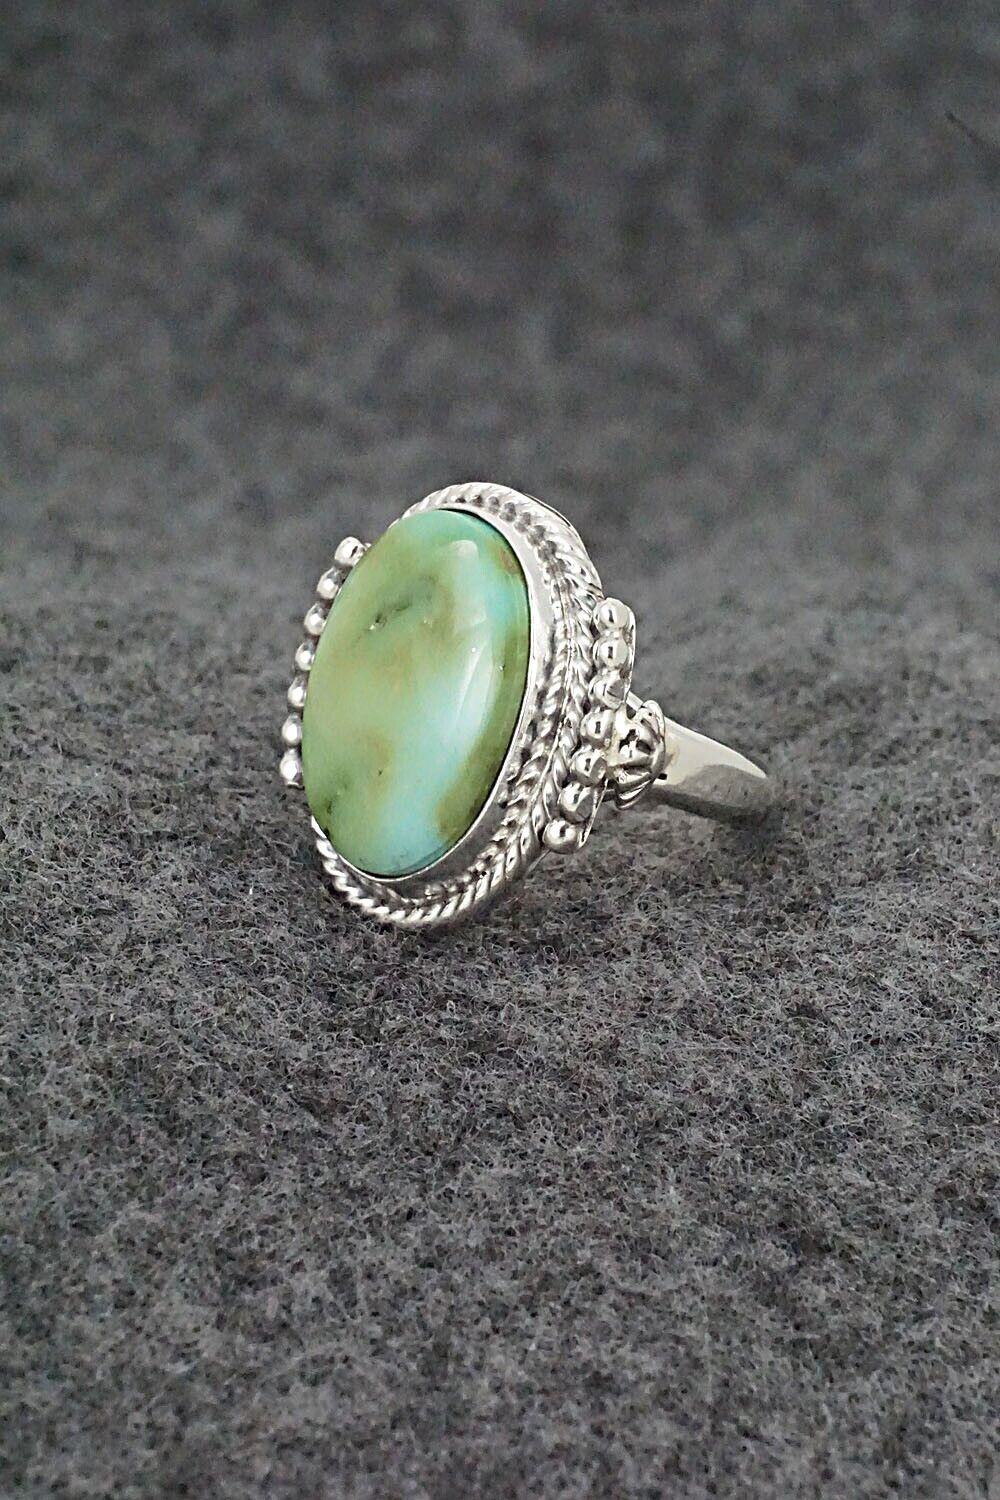 Turquoise & Sterling Silver Ring - Andrew Vandever - Size 5.75